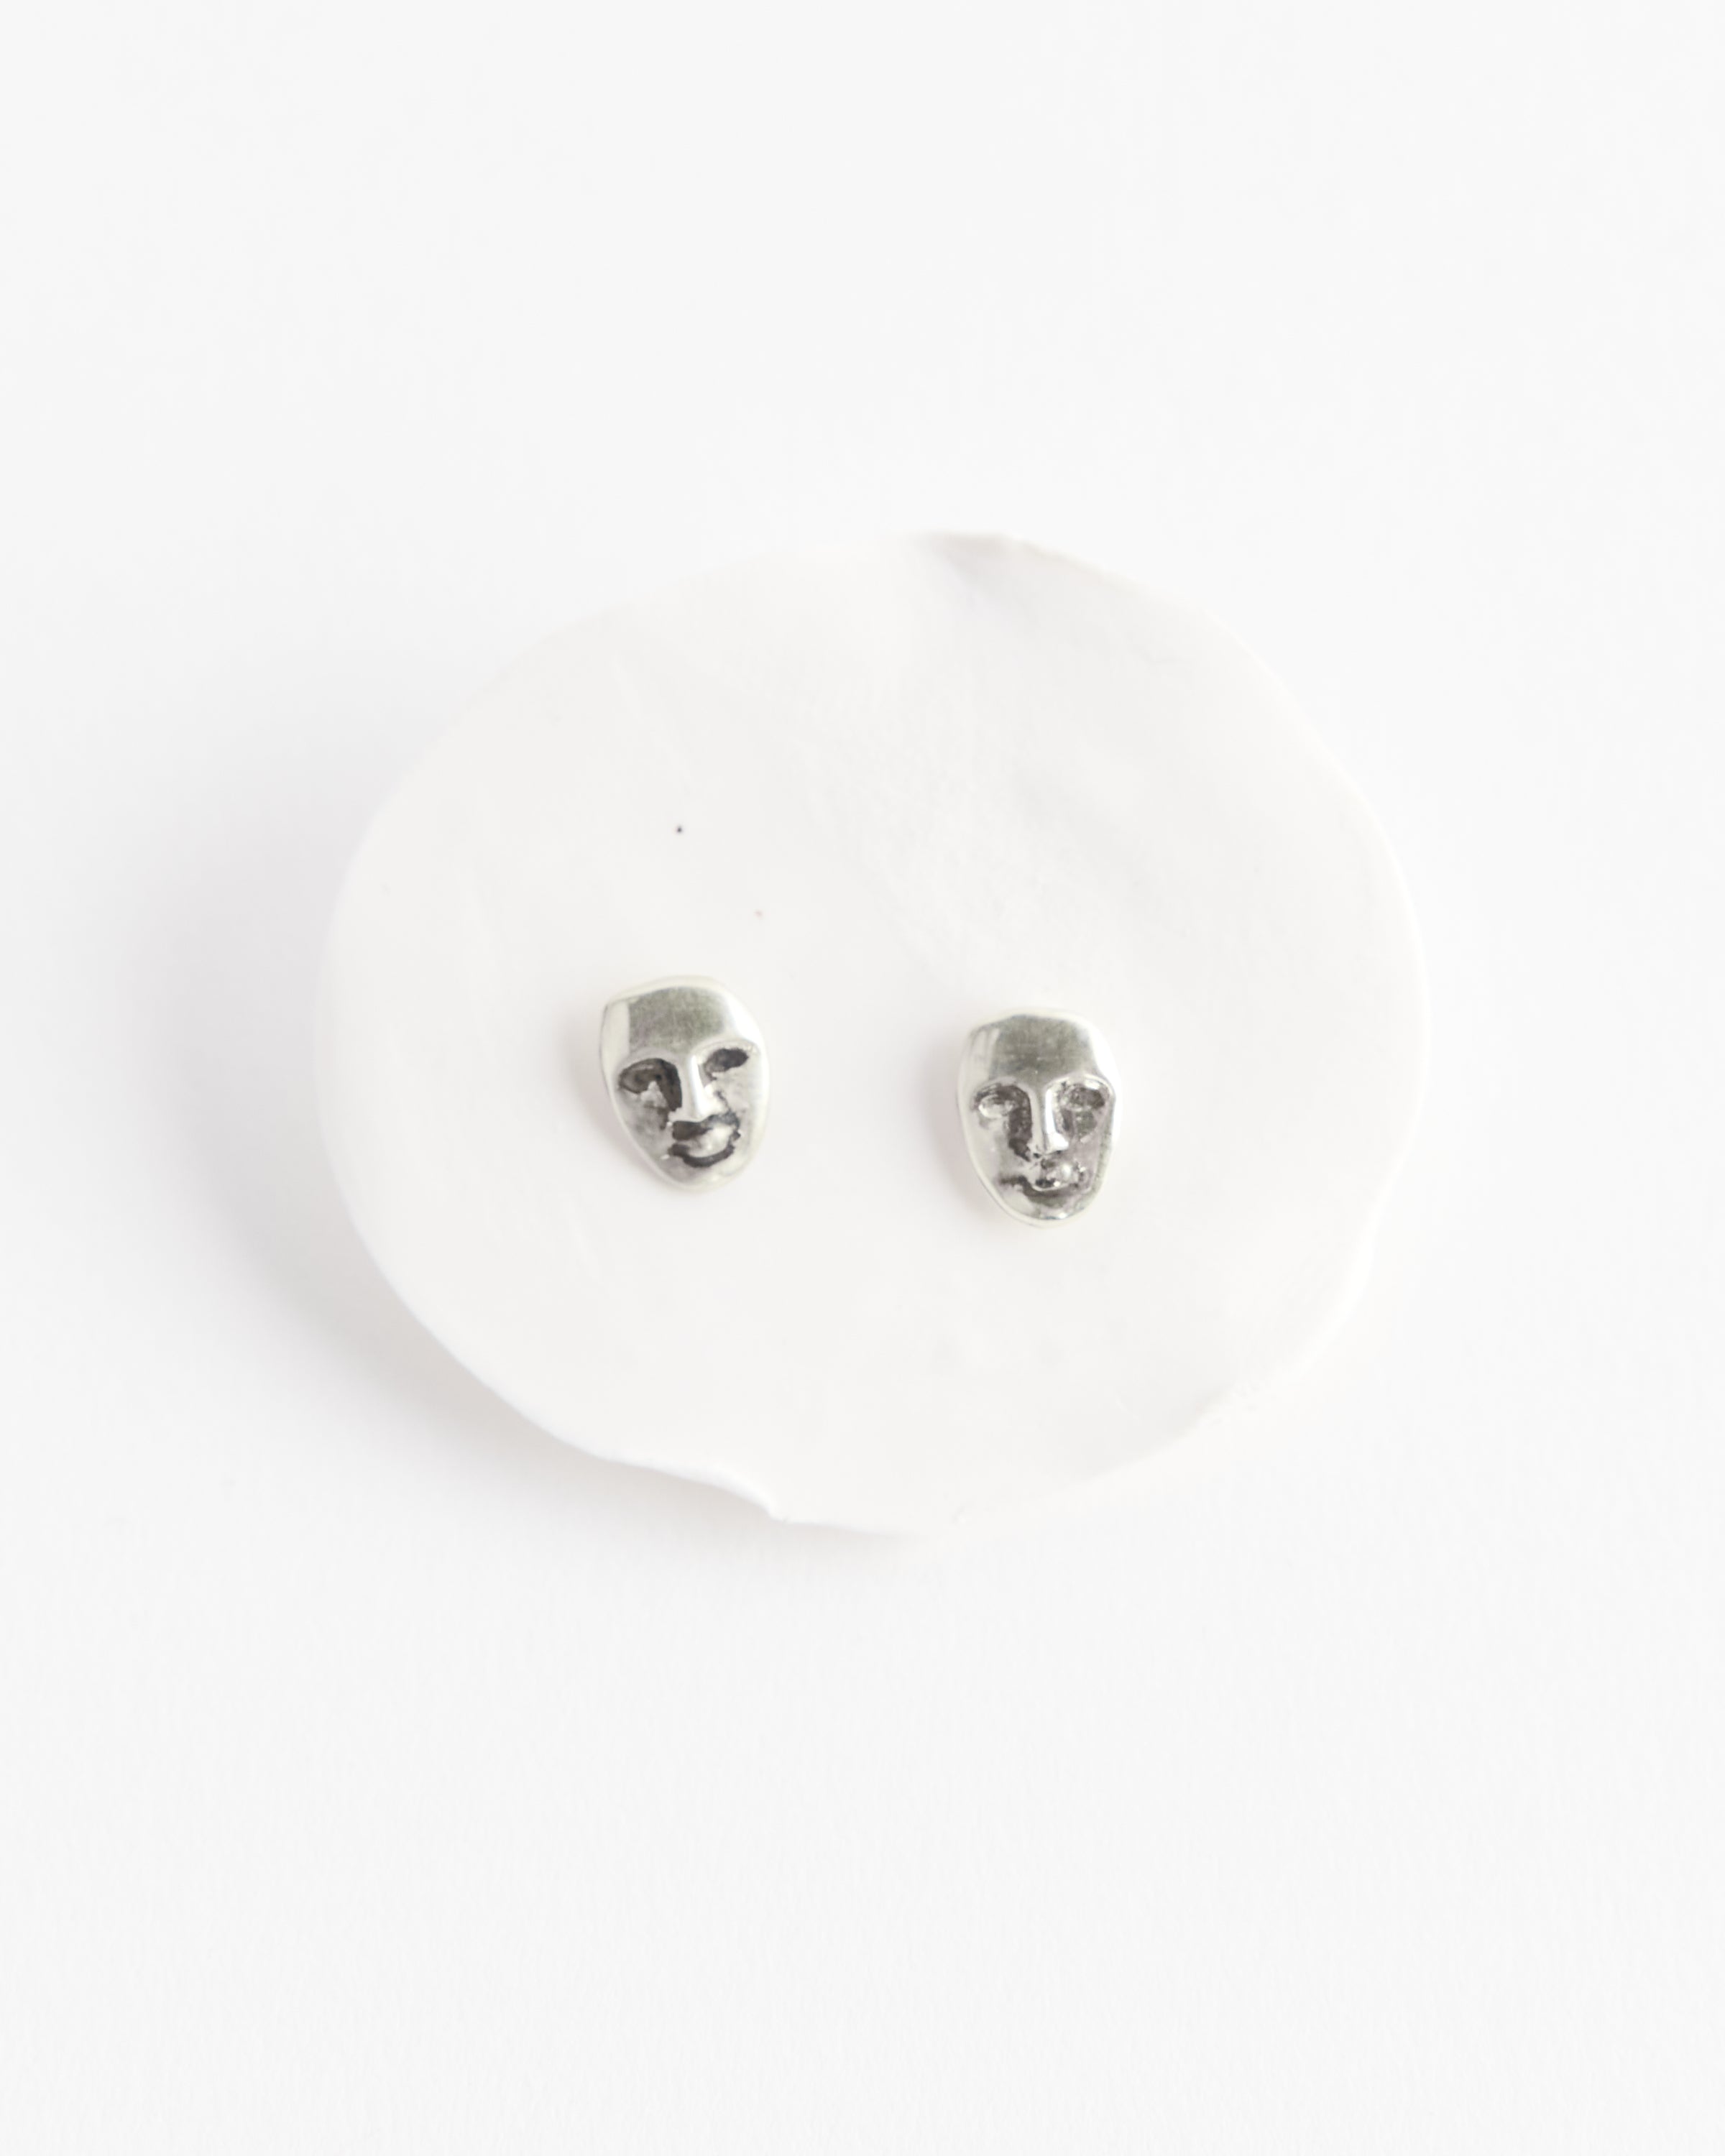 Mini Face Studs in Sterling Silver